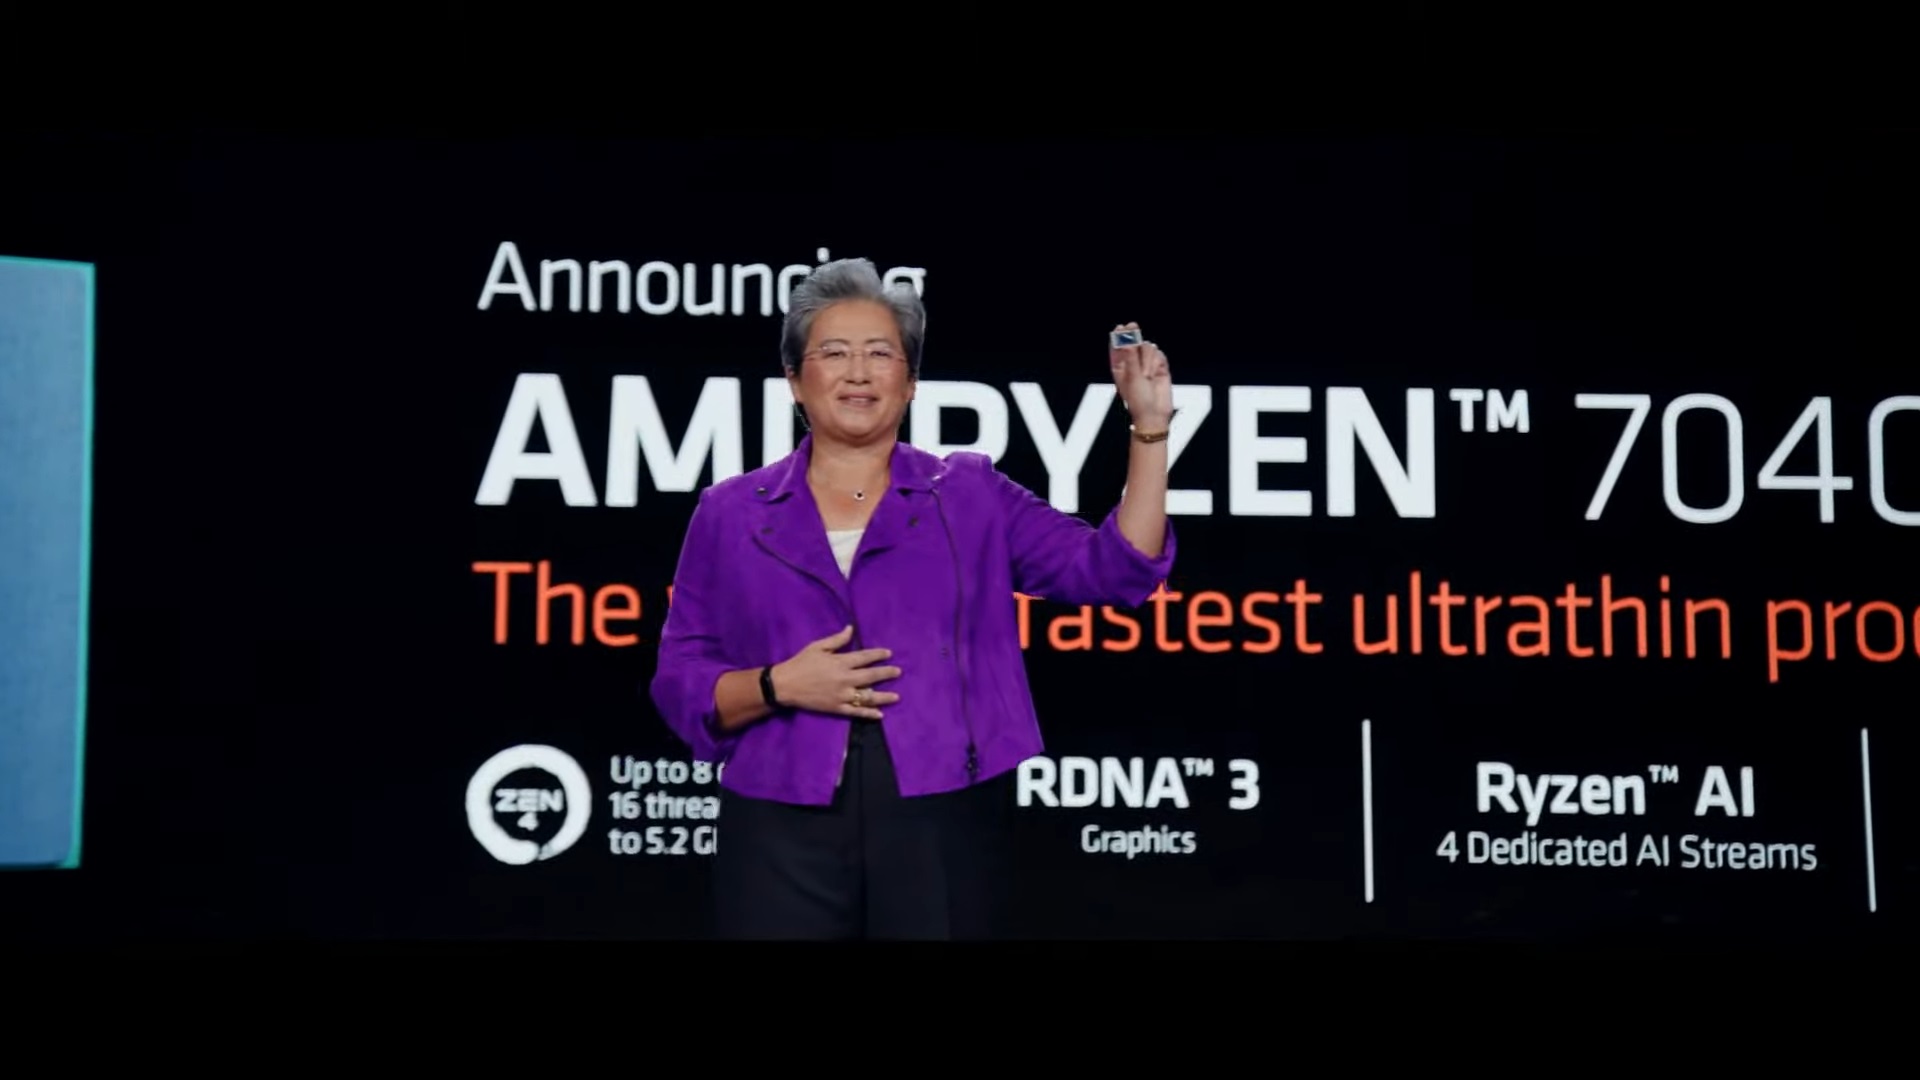 AMD Reveals New Ryzen 7 7800 and 7950X3D CPUs at CES 2023 - Video